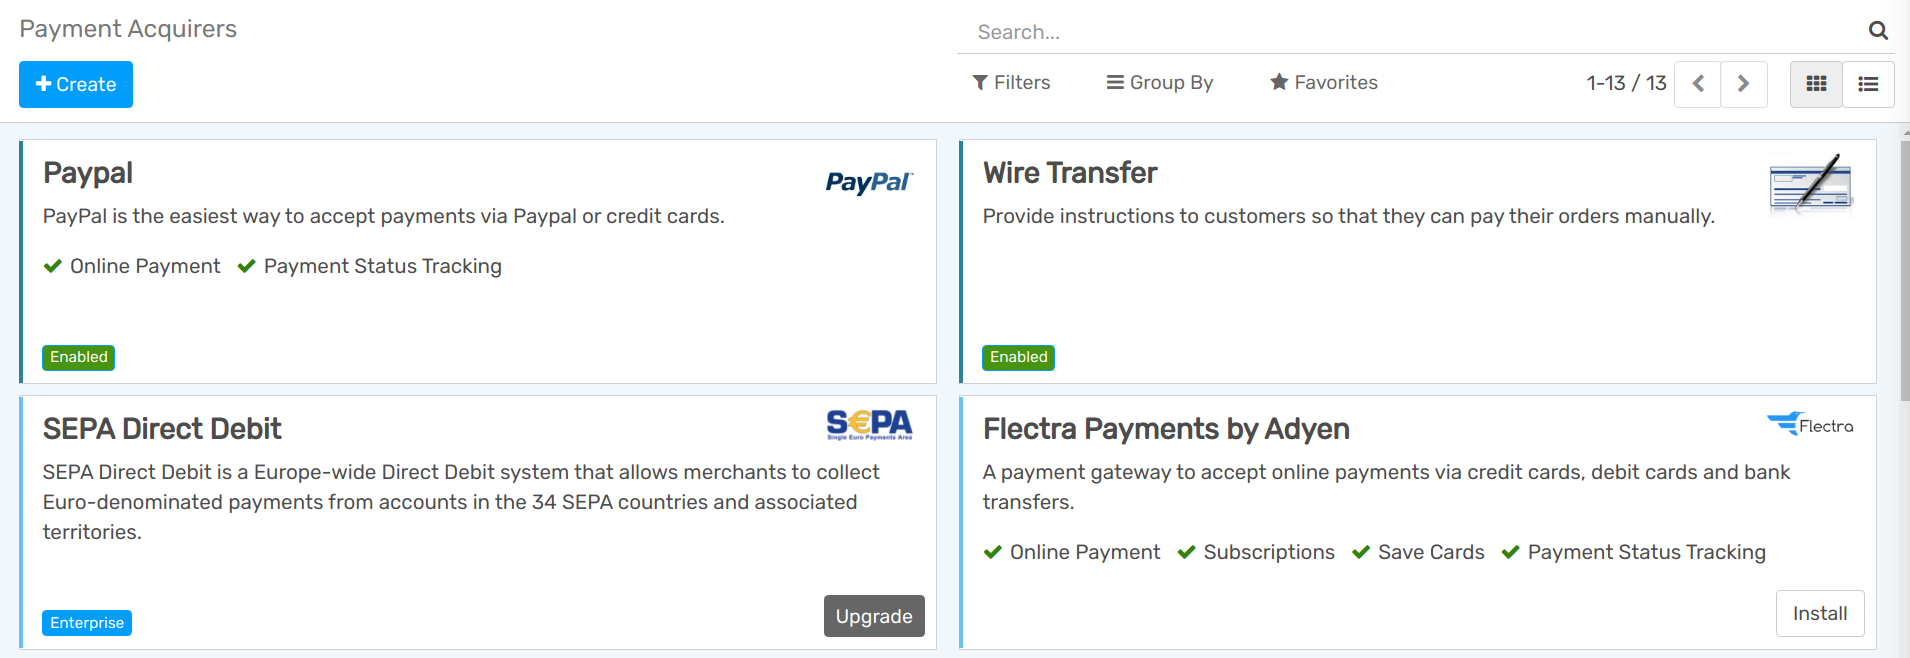 Click on install, then on activate to make the payment acquirer available on Flectra.